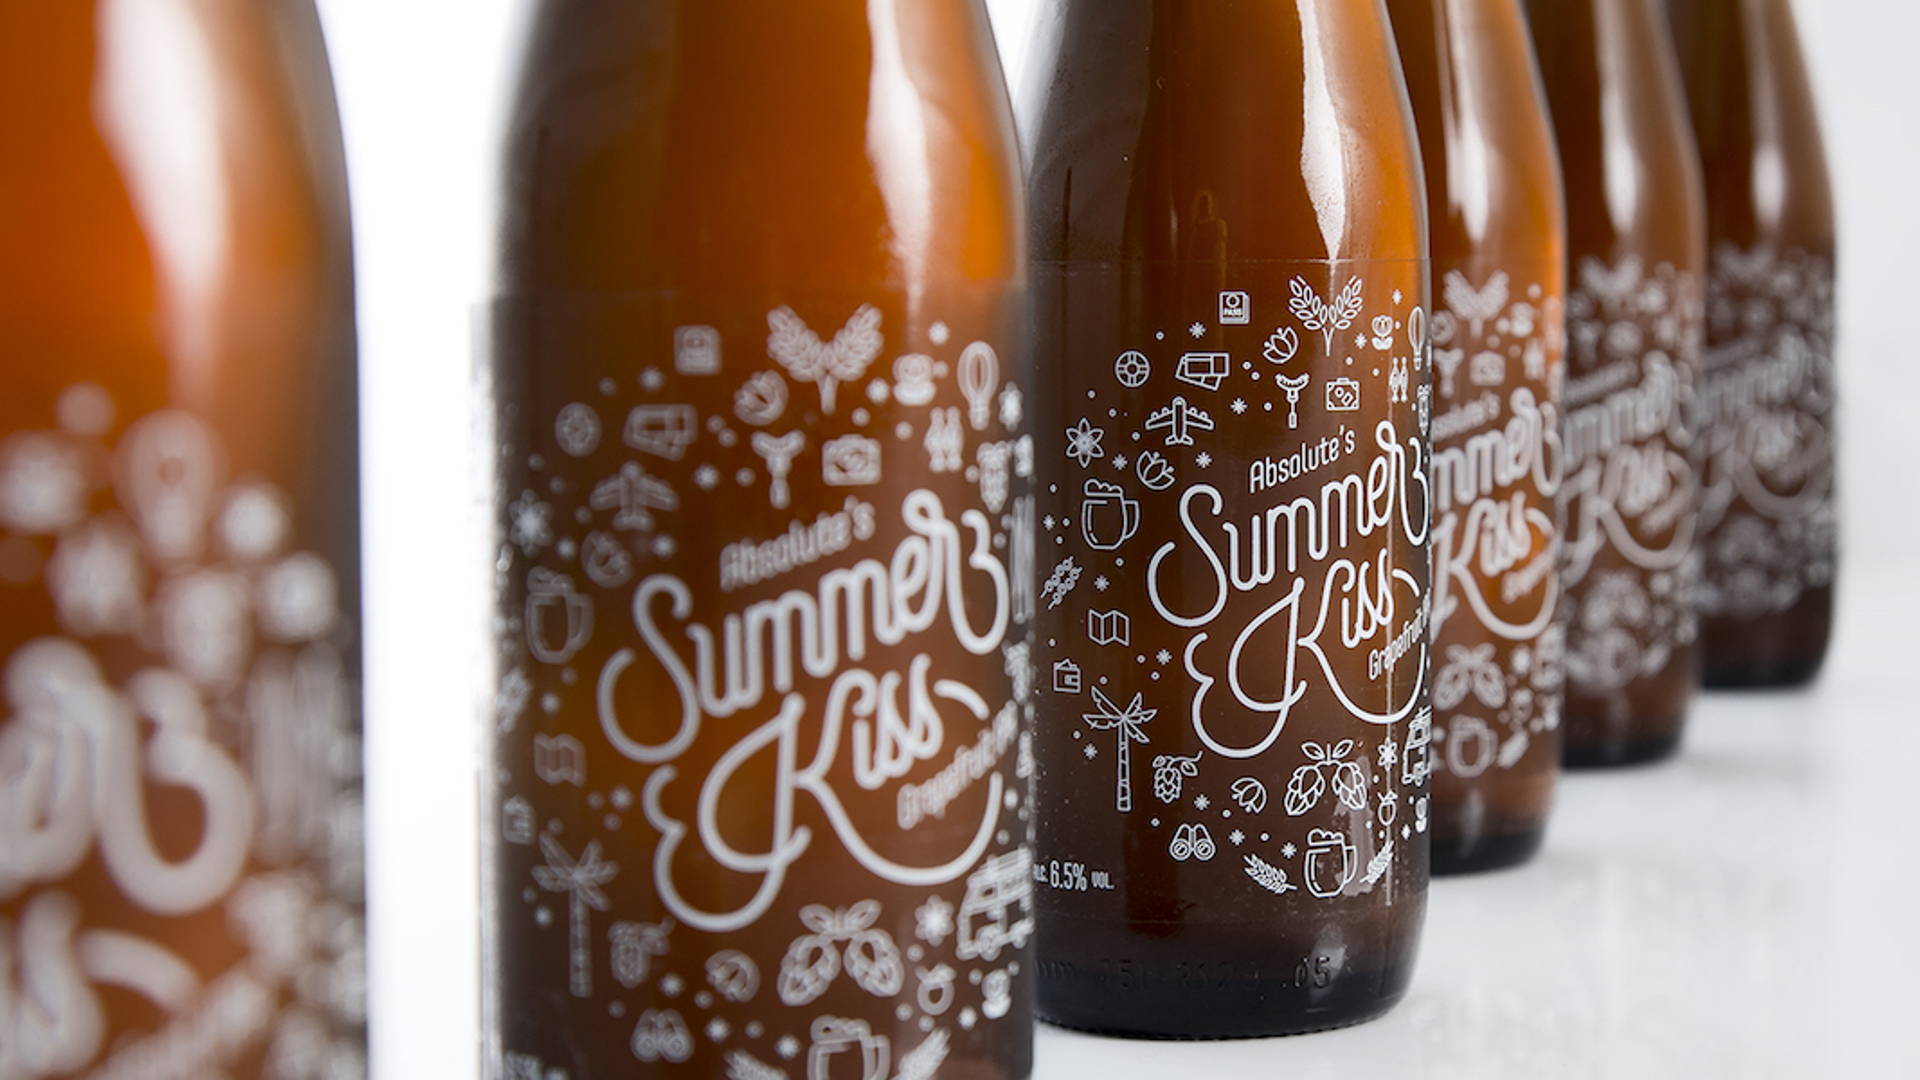 Featured image for Absolute’s Summer Kiss IPA